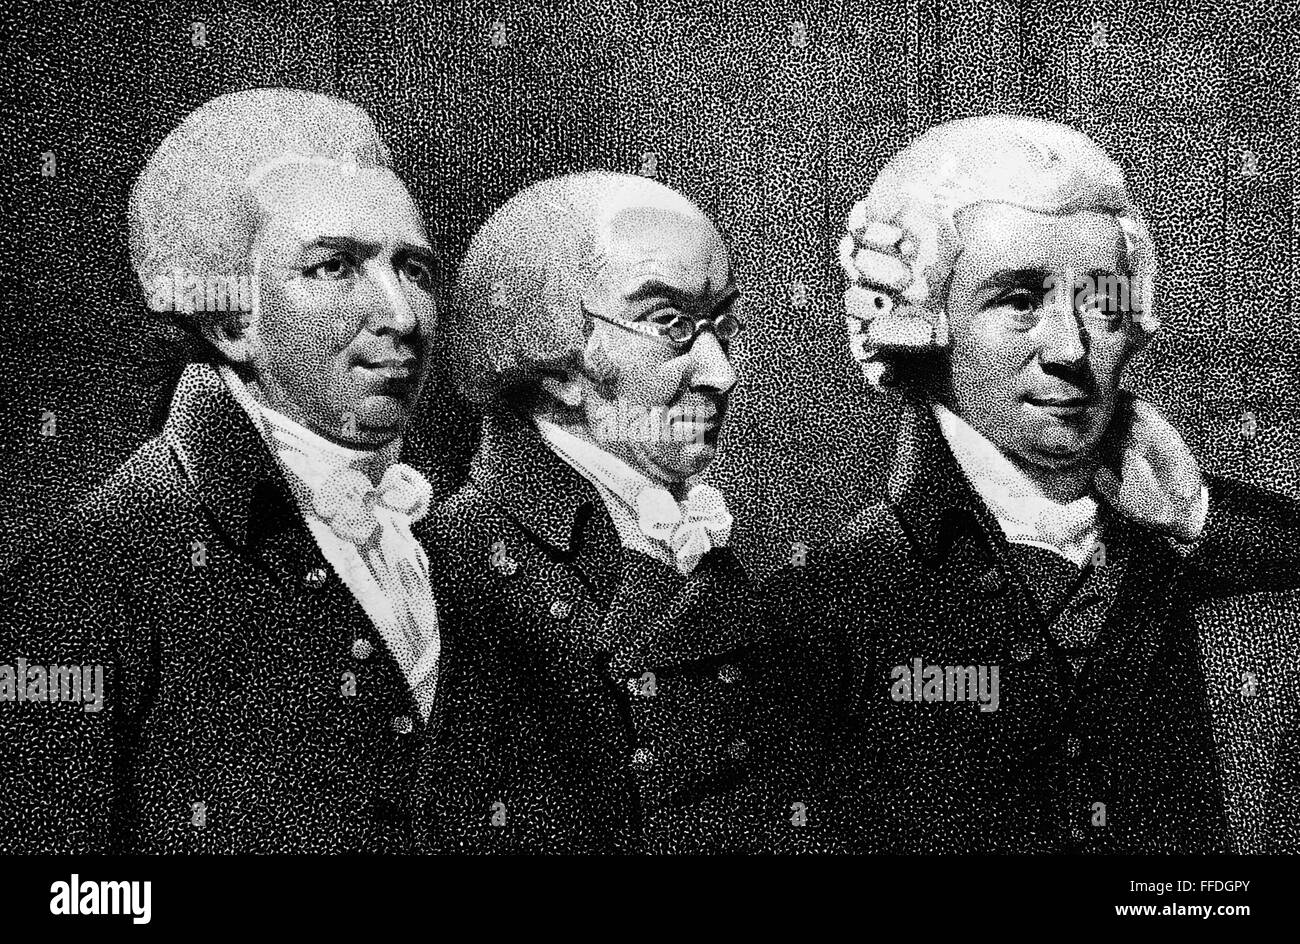 EDWARD BANCROFT (1744-1821). /nAmerican physician and double agent during the American Revolution. Bancroft, far left, with Dr. Ware and Dr. Thomas Bradley. Detail from an engraved group portrait of the founders of the Medical Society of London, by Samuel Stock Photo